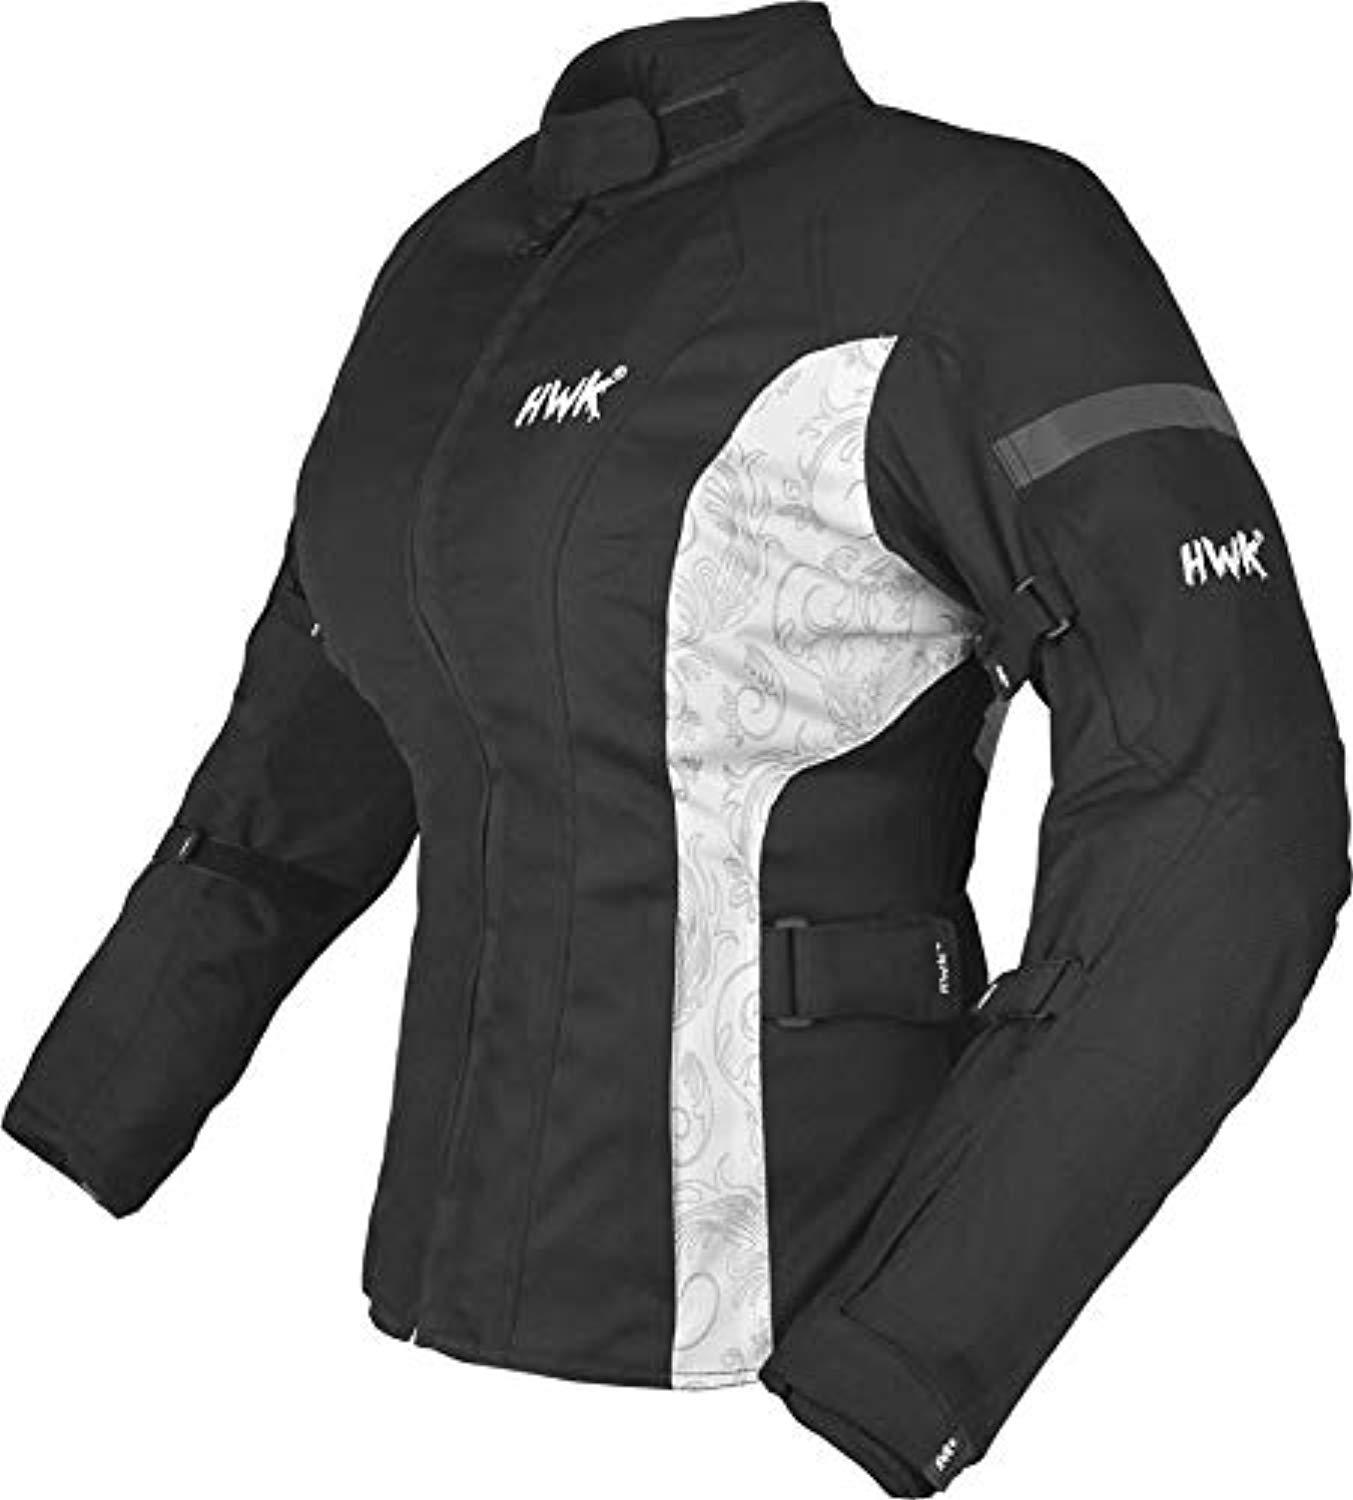 womens motorcycle jacket with armor